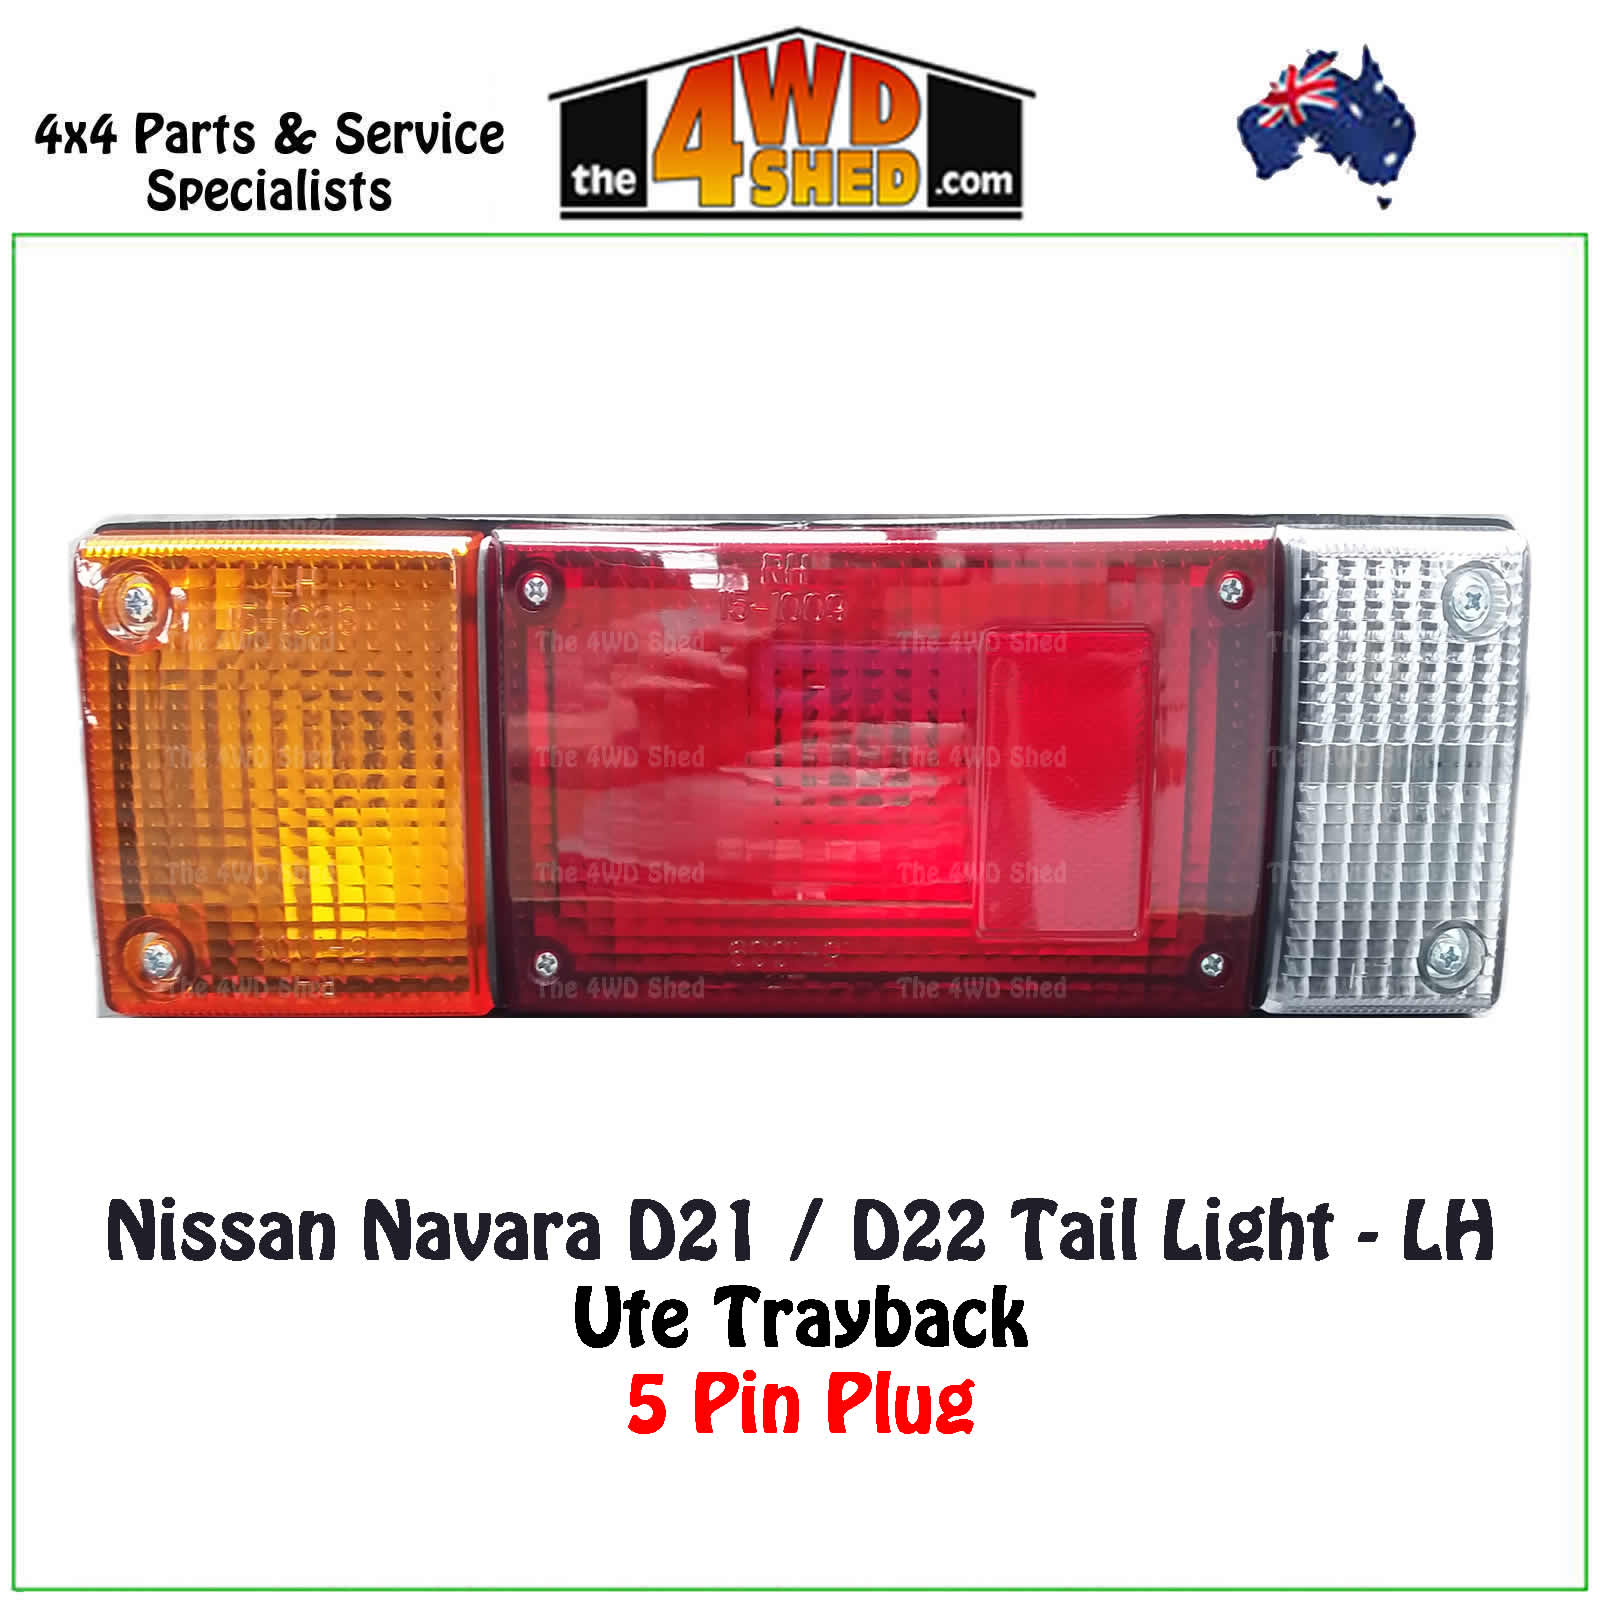 Navara D21 / D22 TRAY BACK Tail Light - L/H wiring diagram for jeep 